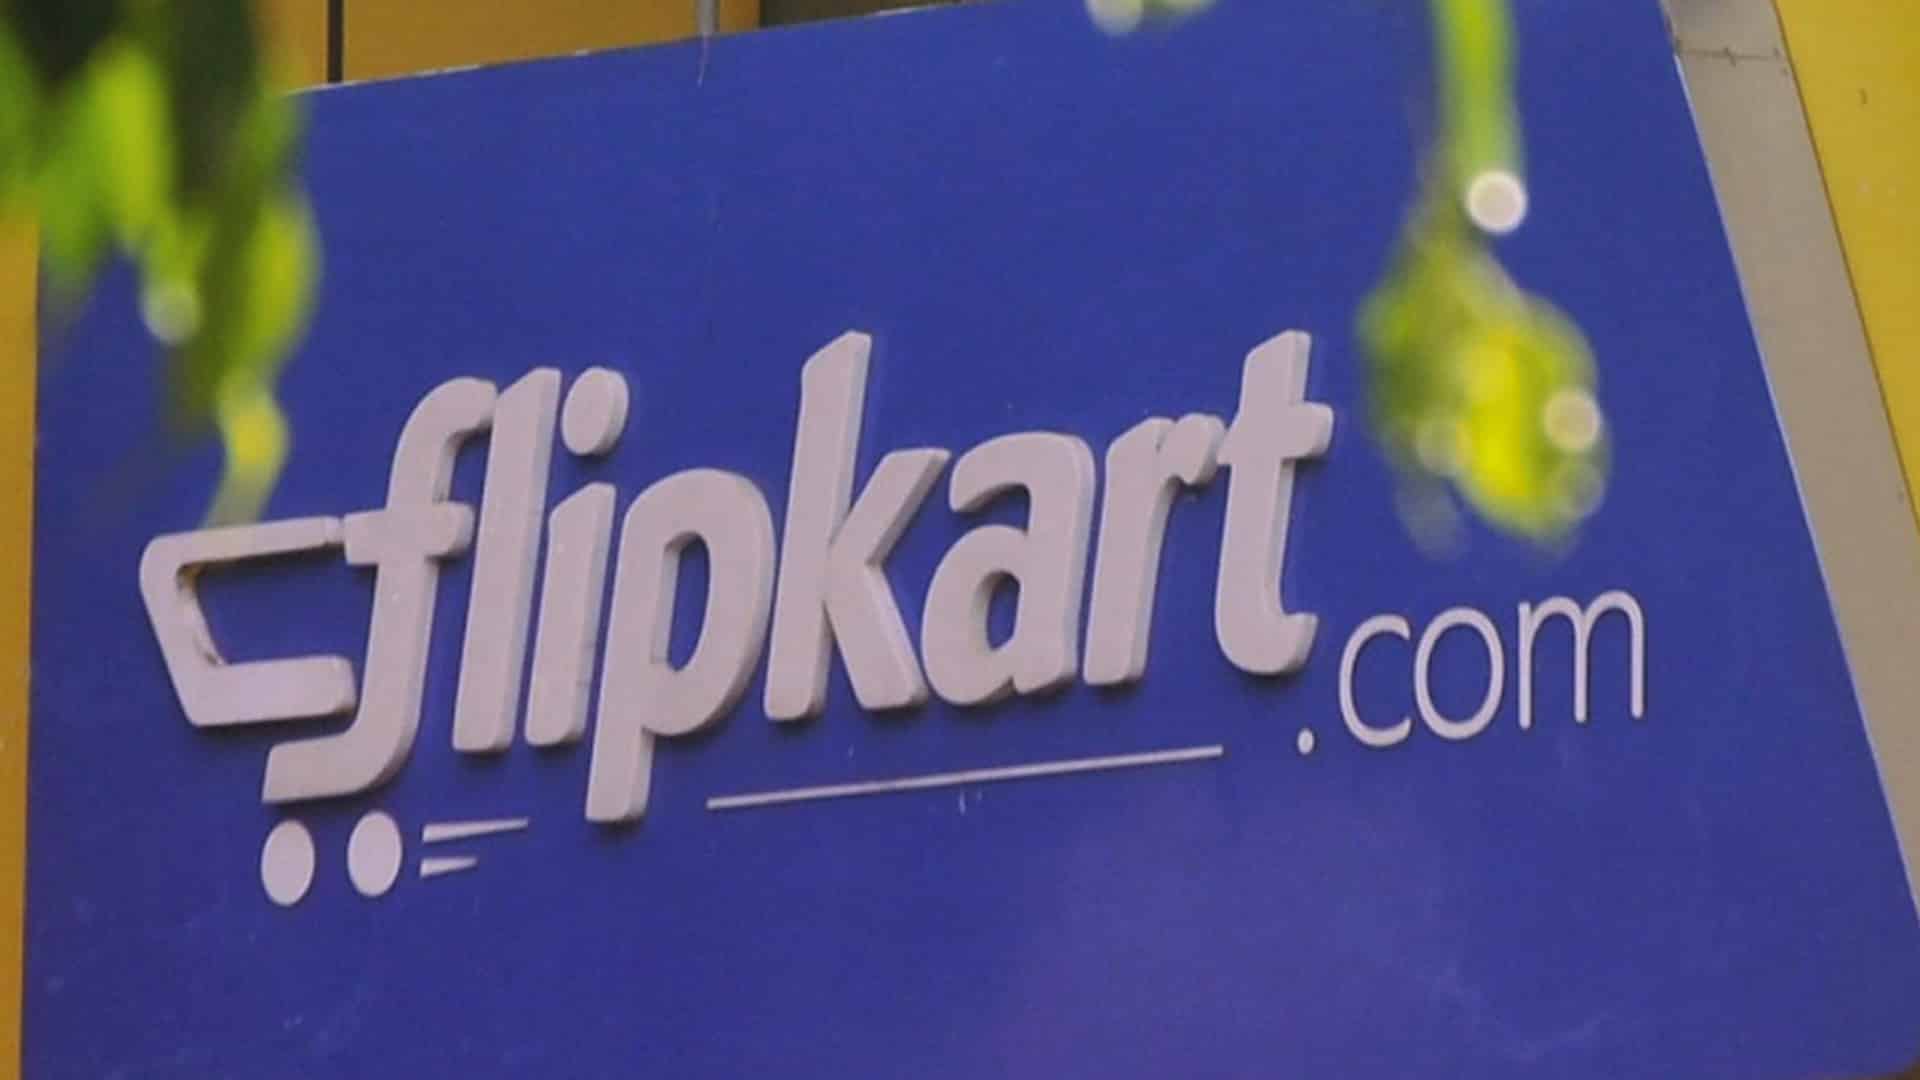 Flipkart makes estimated USD 700 mn cash payout to staff post PhonePe separation